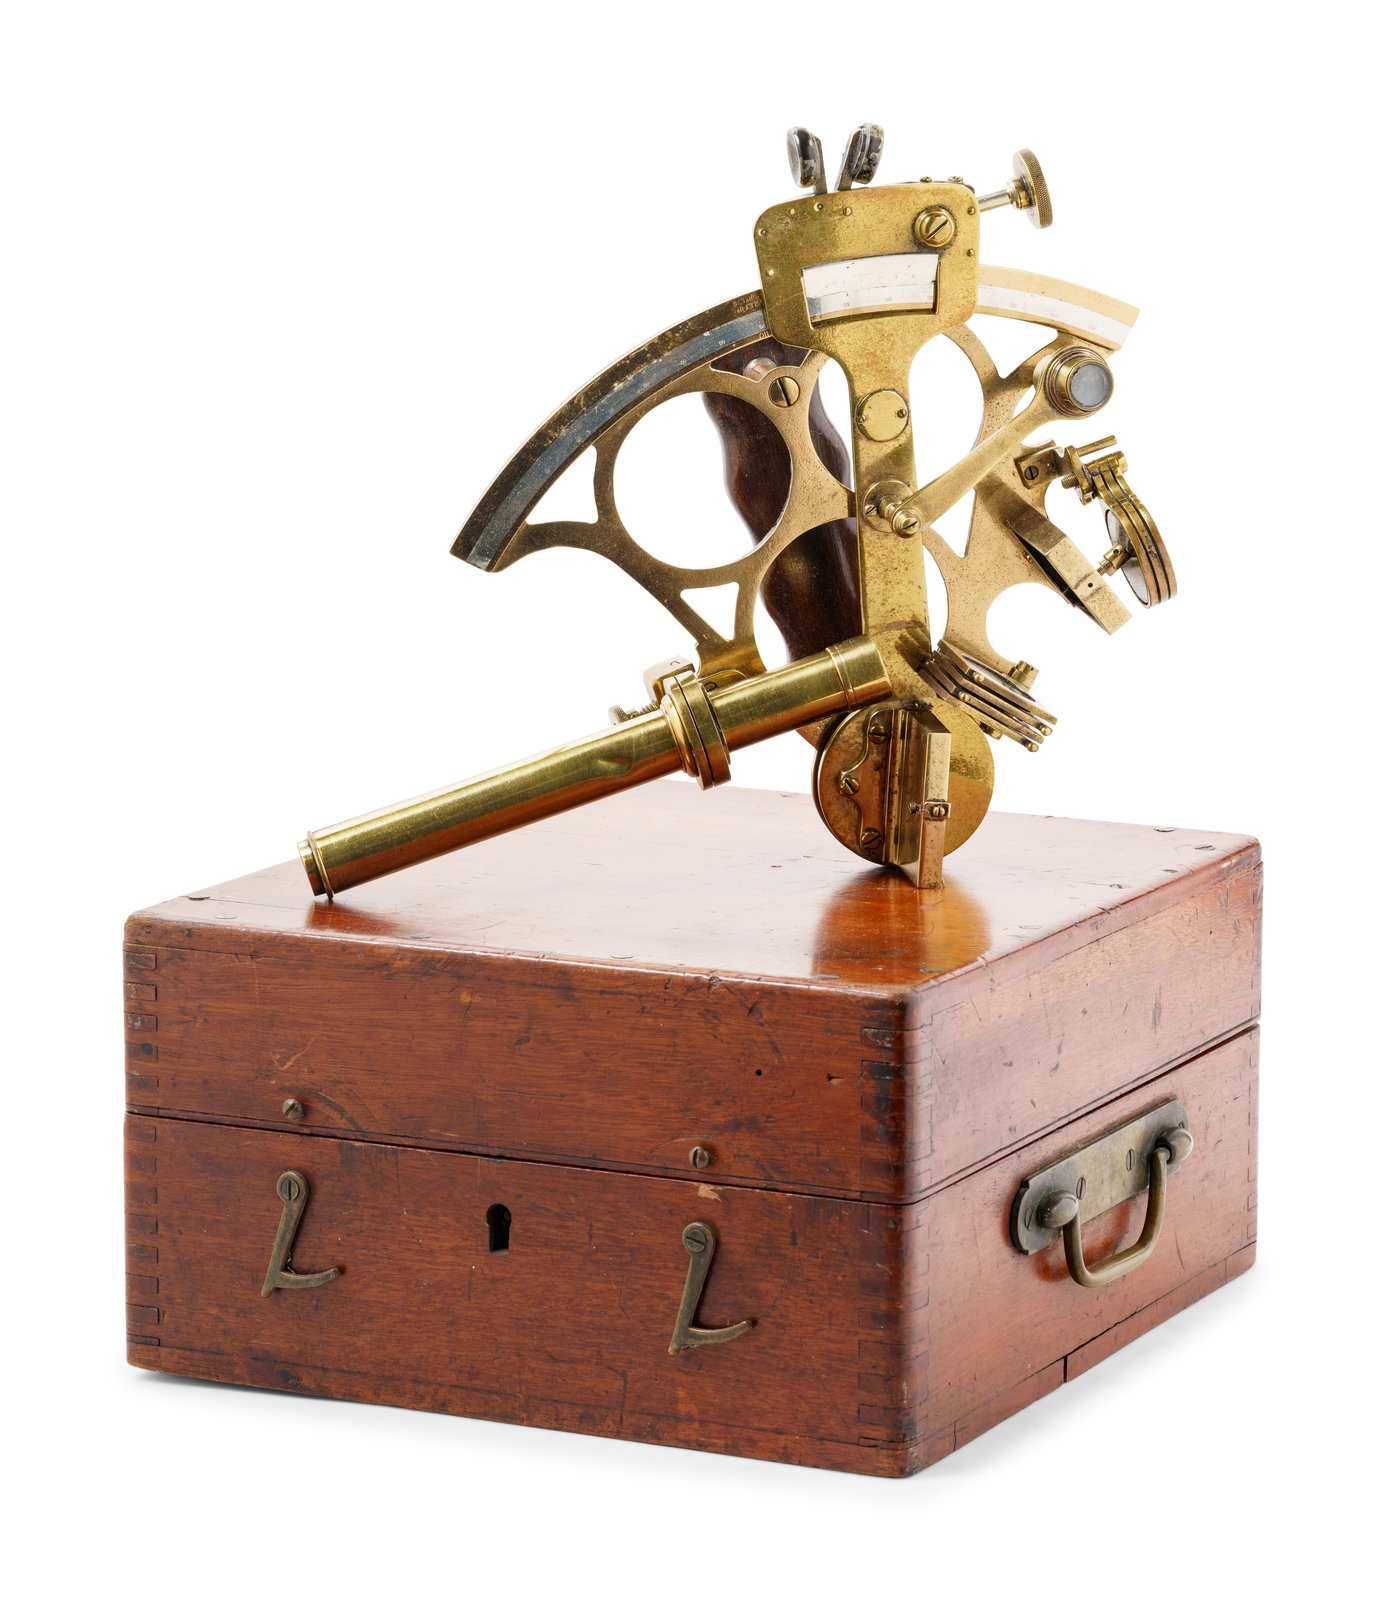 Sold at Auction: Nautical Brass Sextant with Fitted Wooden Box.